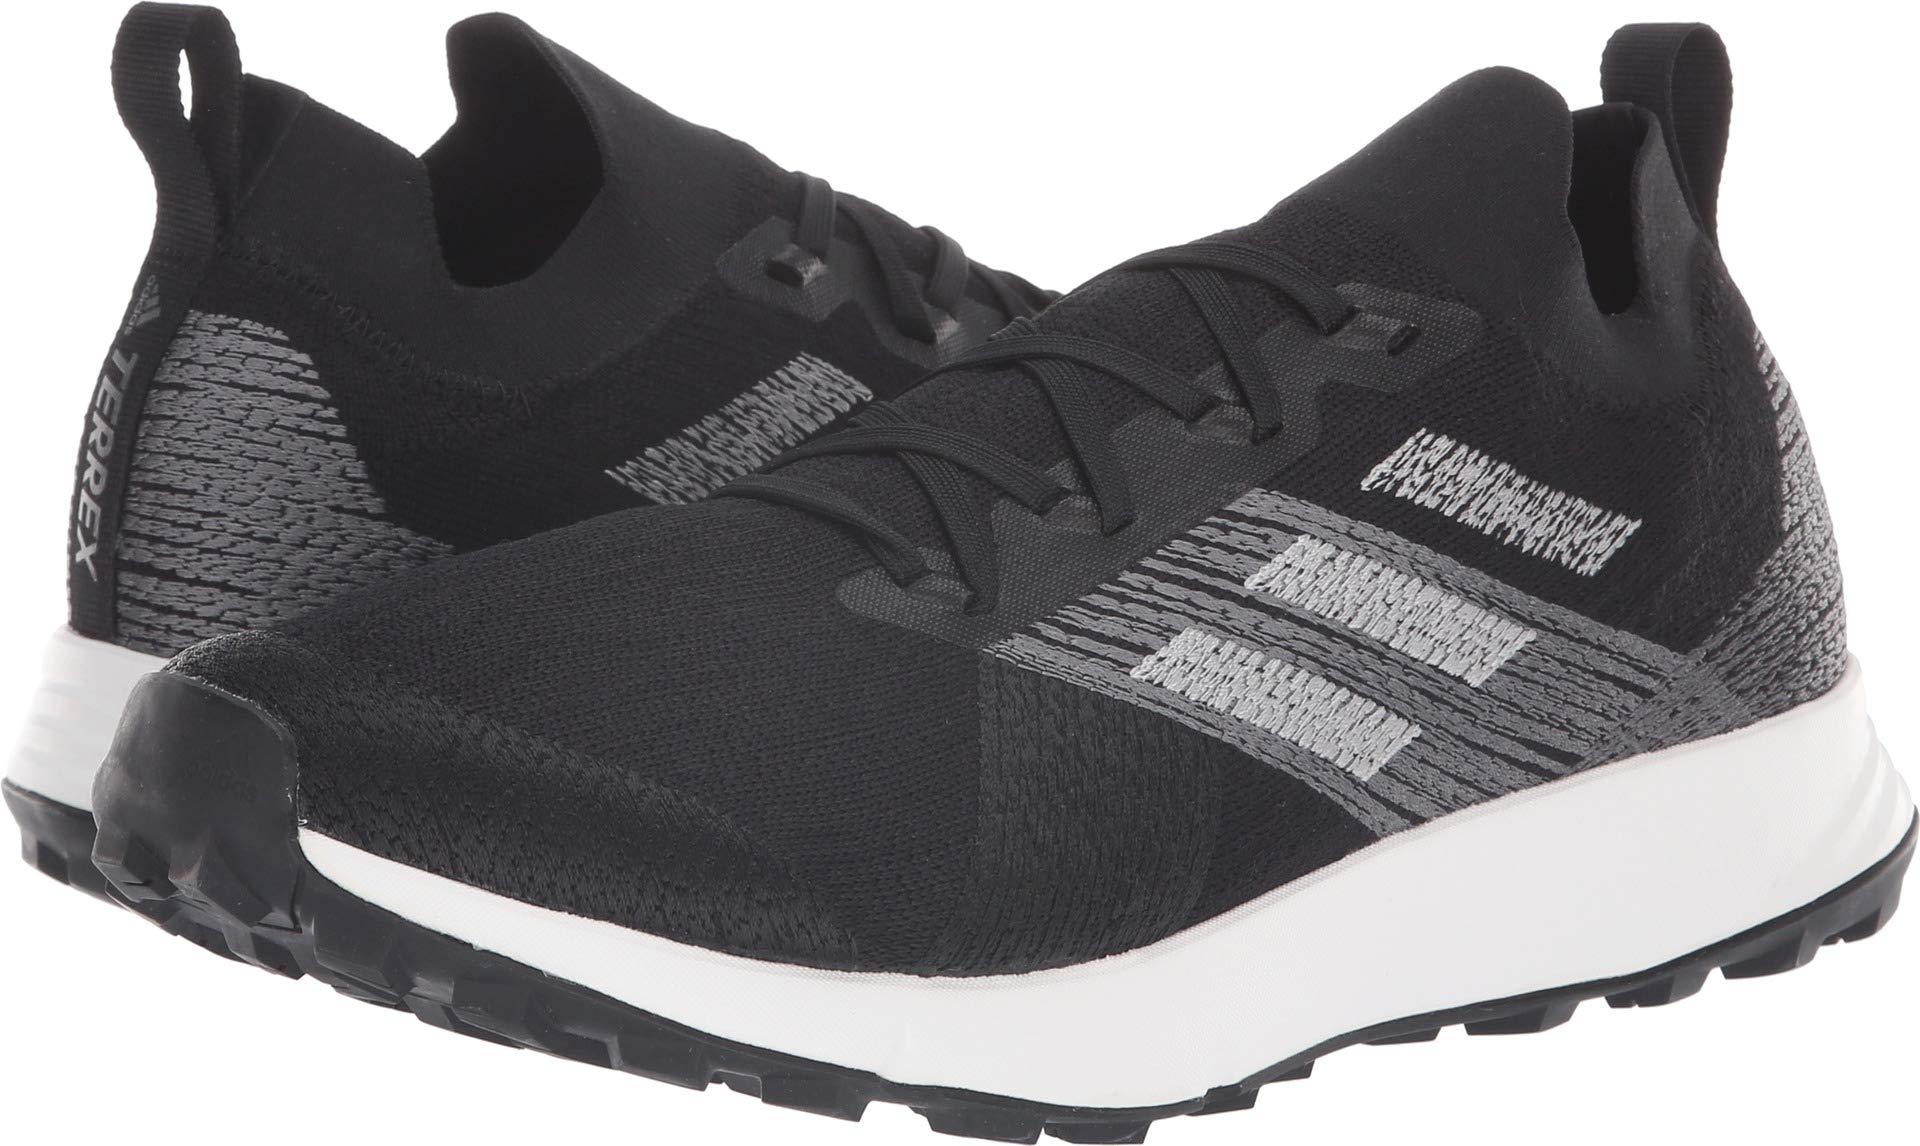 adidas Terrex Two Parley Black/grey Two/white 8.5 D in Black/Grey Two/Crystal  White (Gray) for Men - Lyst